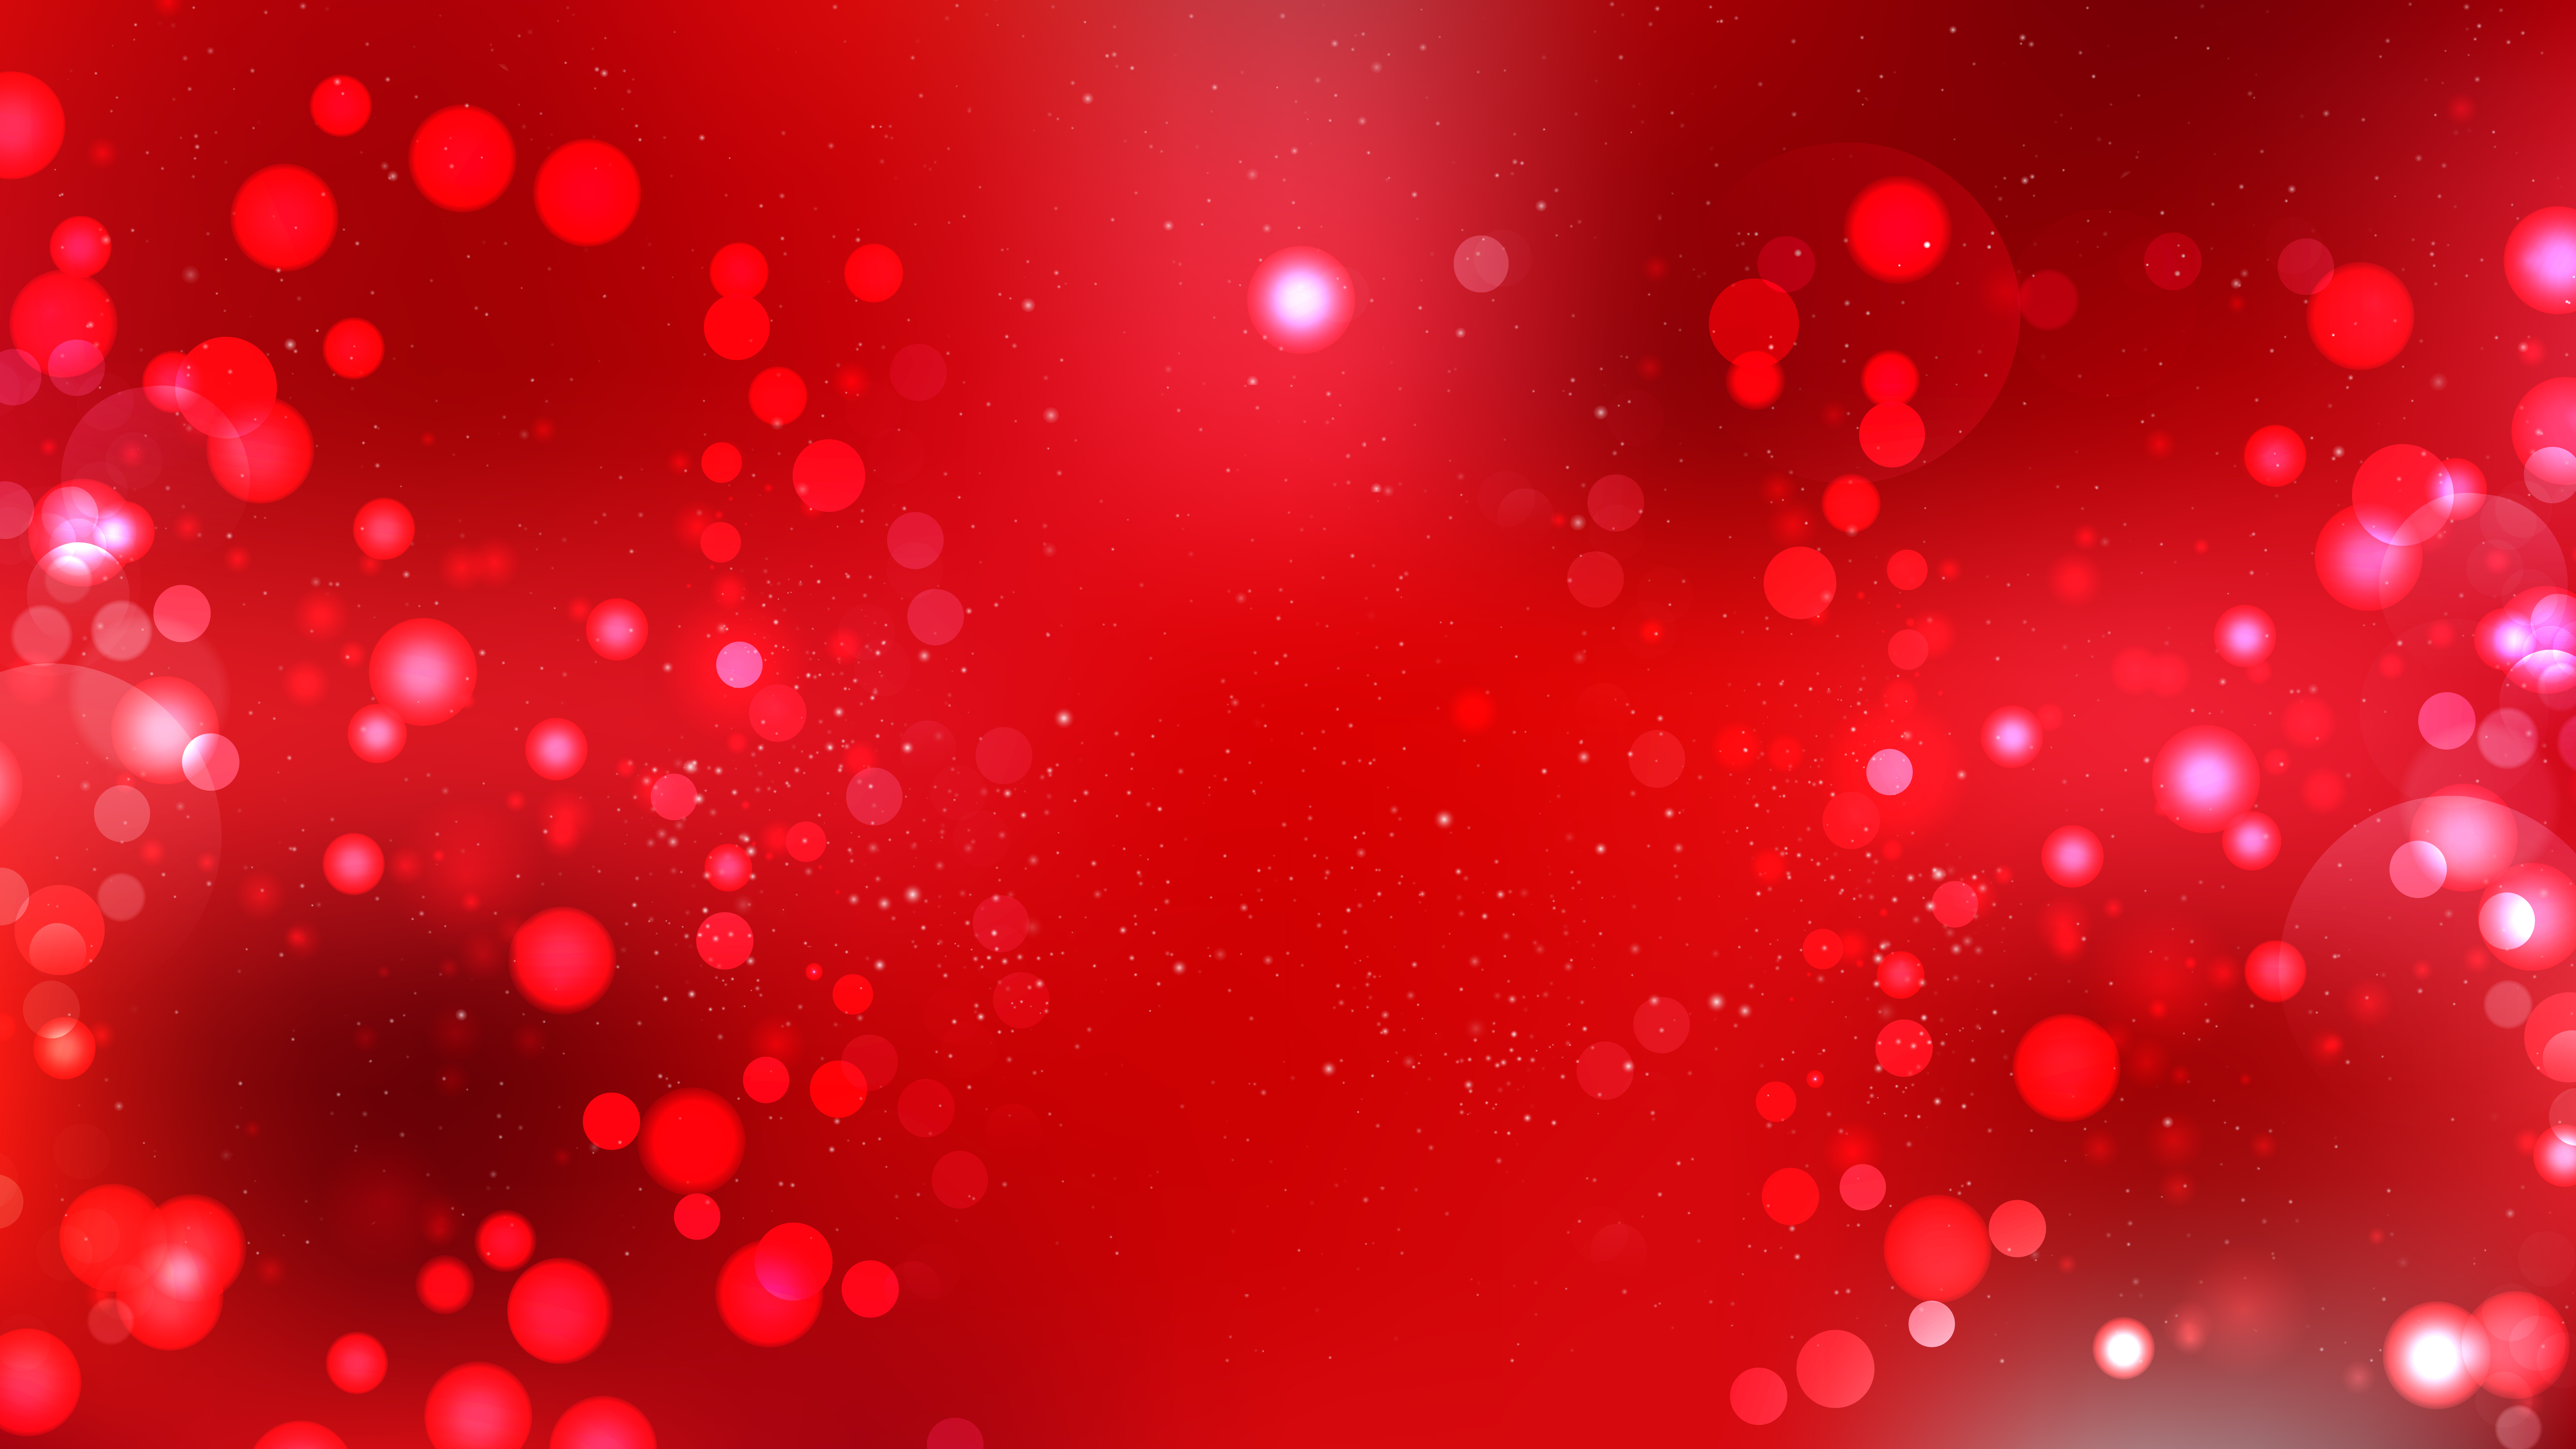 Free Bright Red Blurred Lights Background